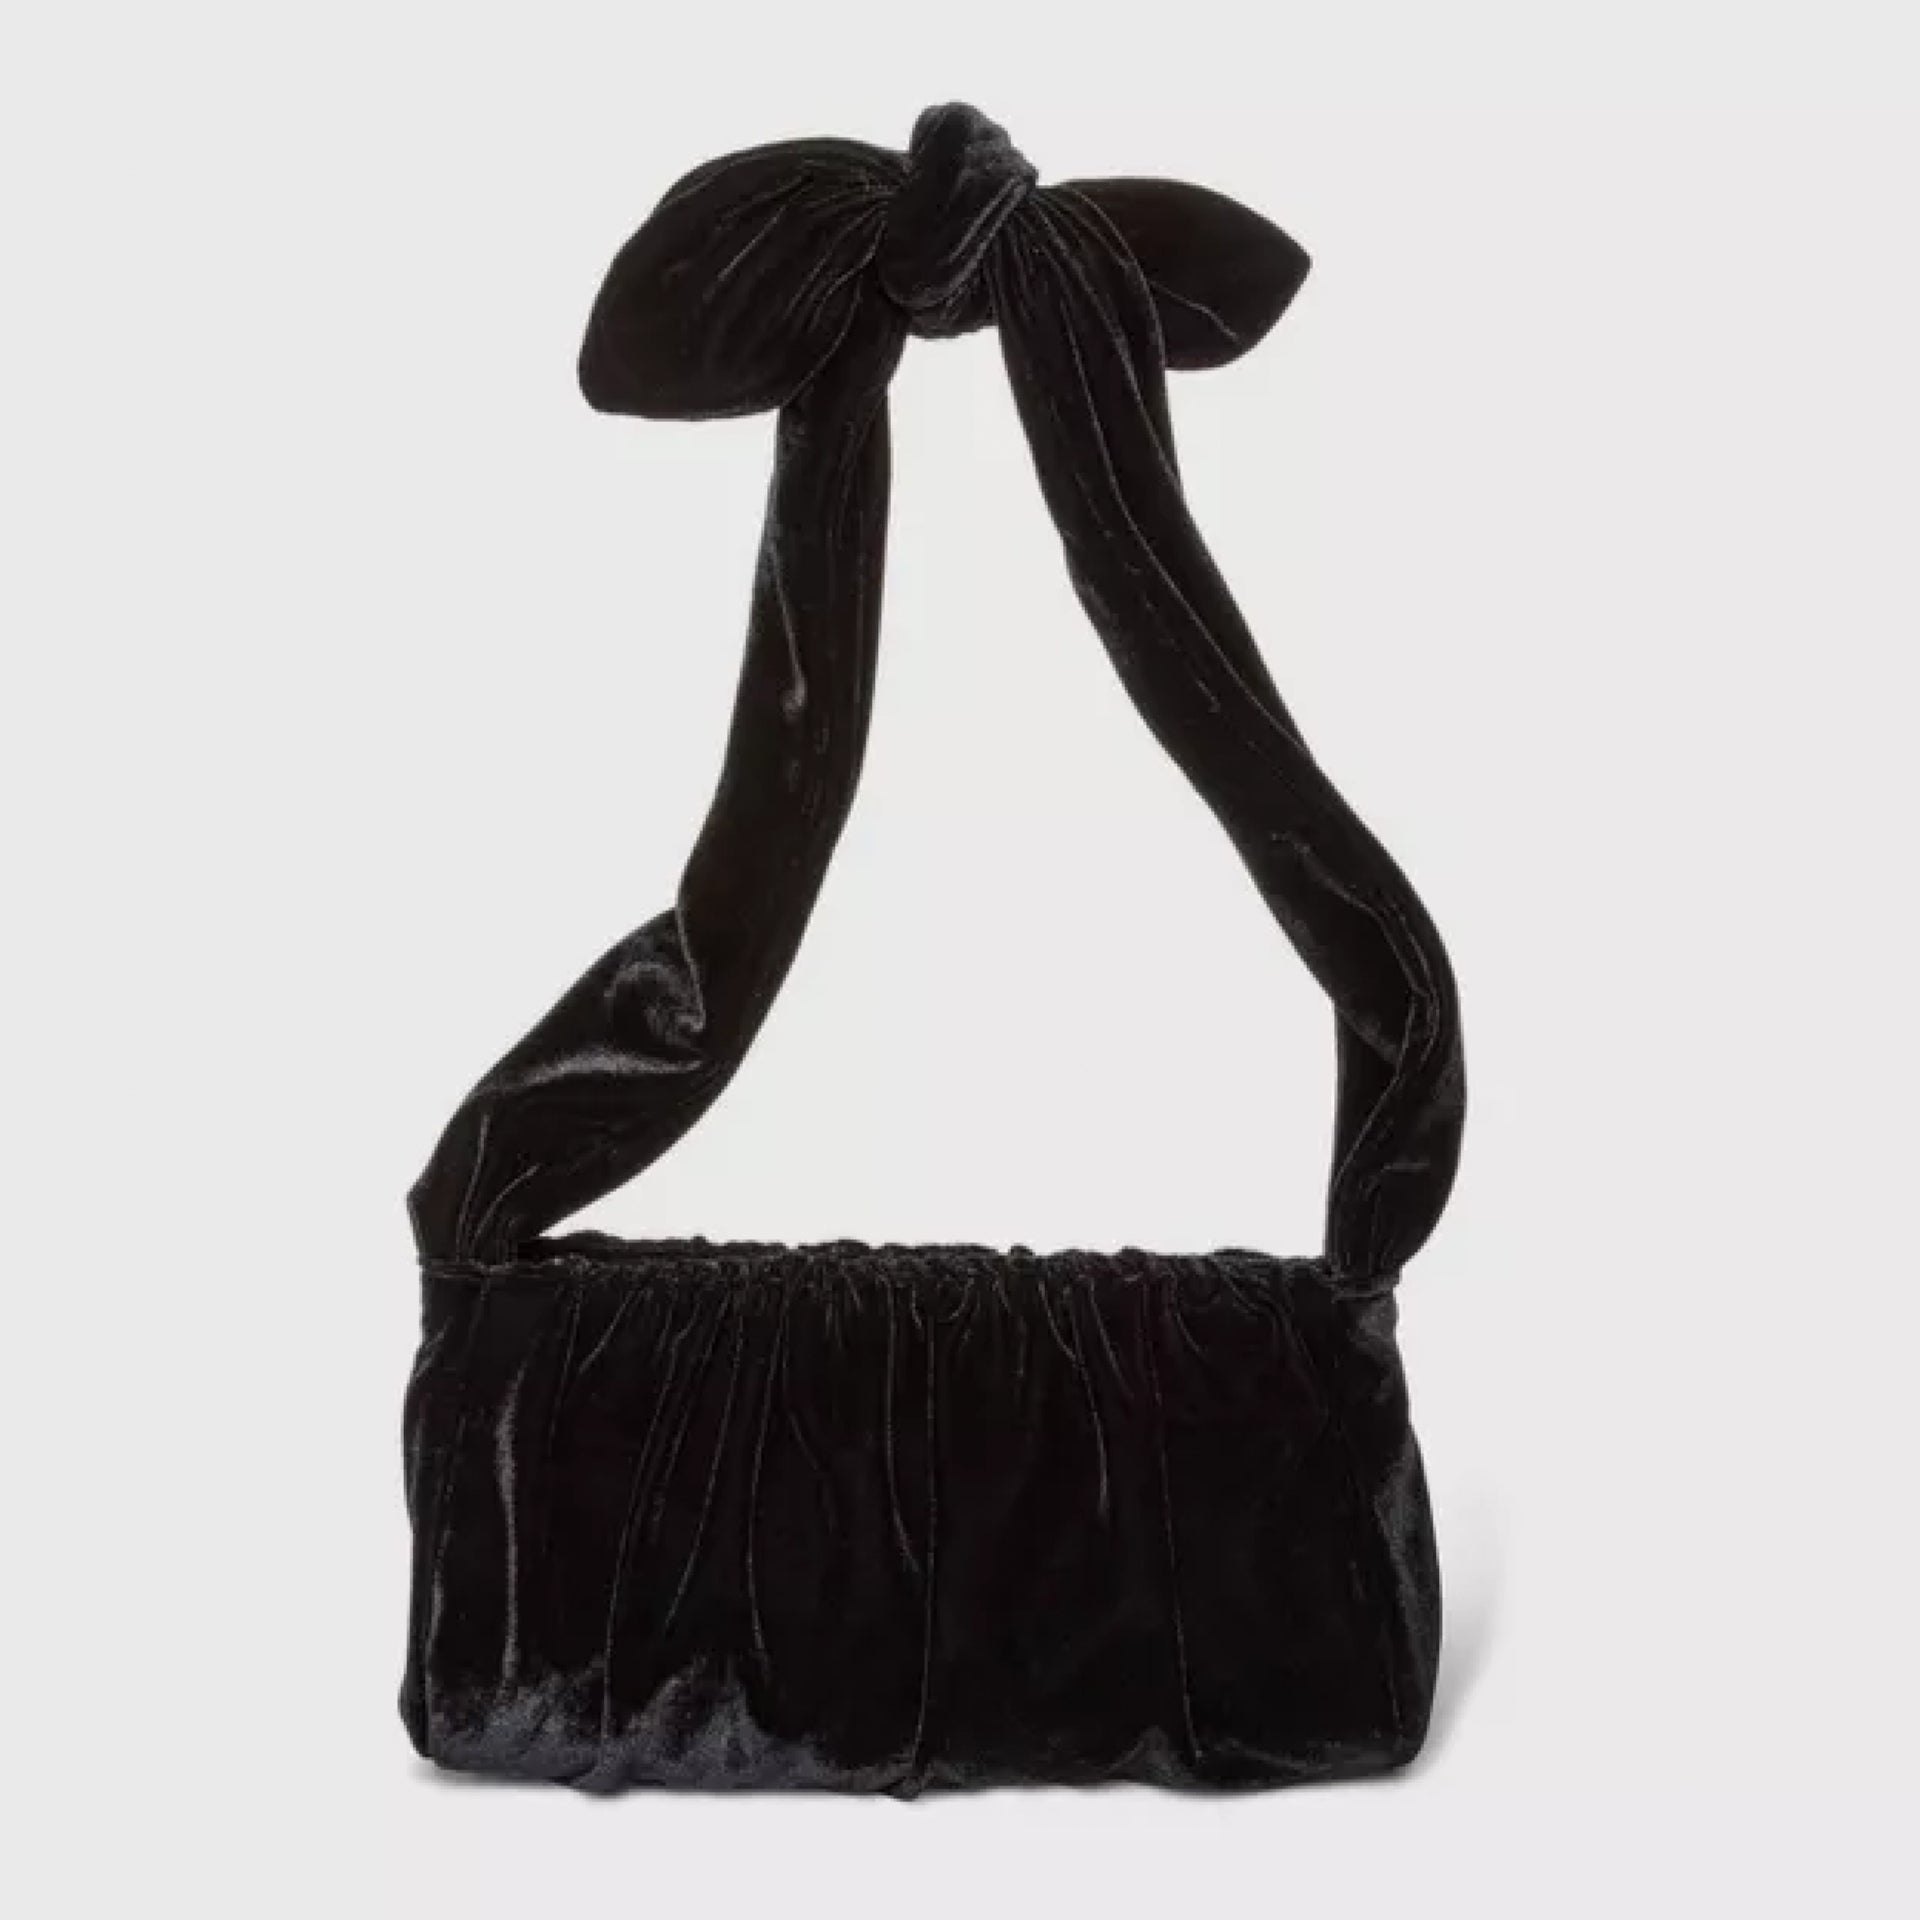 20 Handbags You Can’t Do New Year’s Eve Without